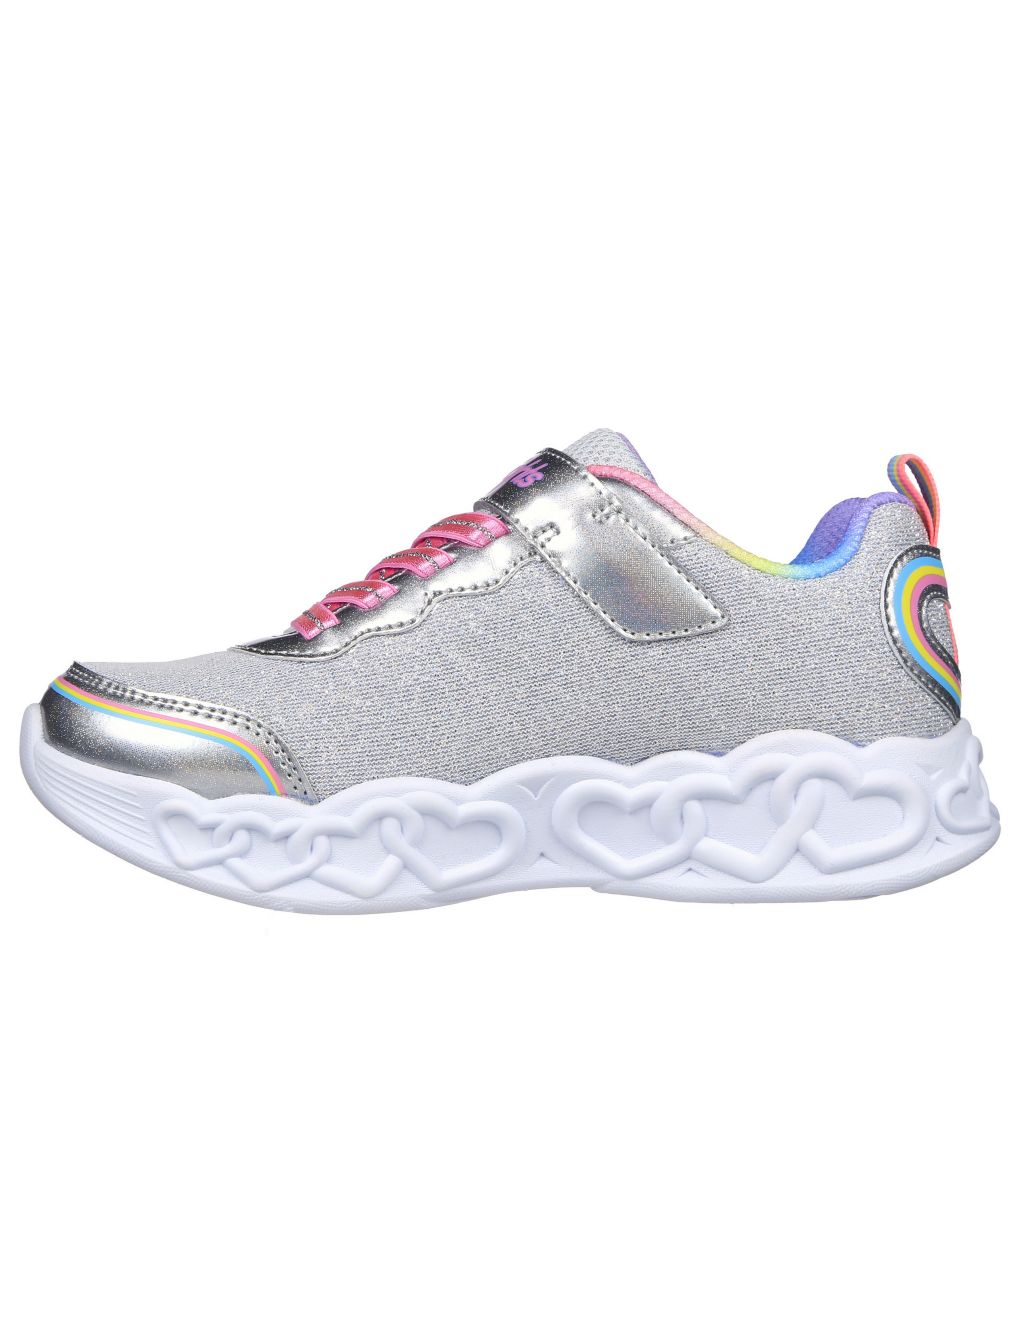 Infinite Heart Lights Love Prism Trainers (9.5 Small - 3 Large) image 4